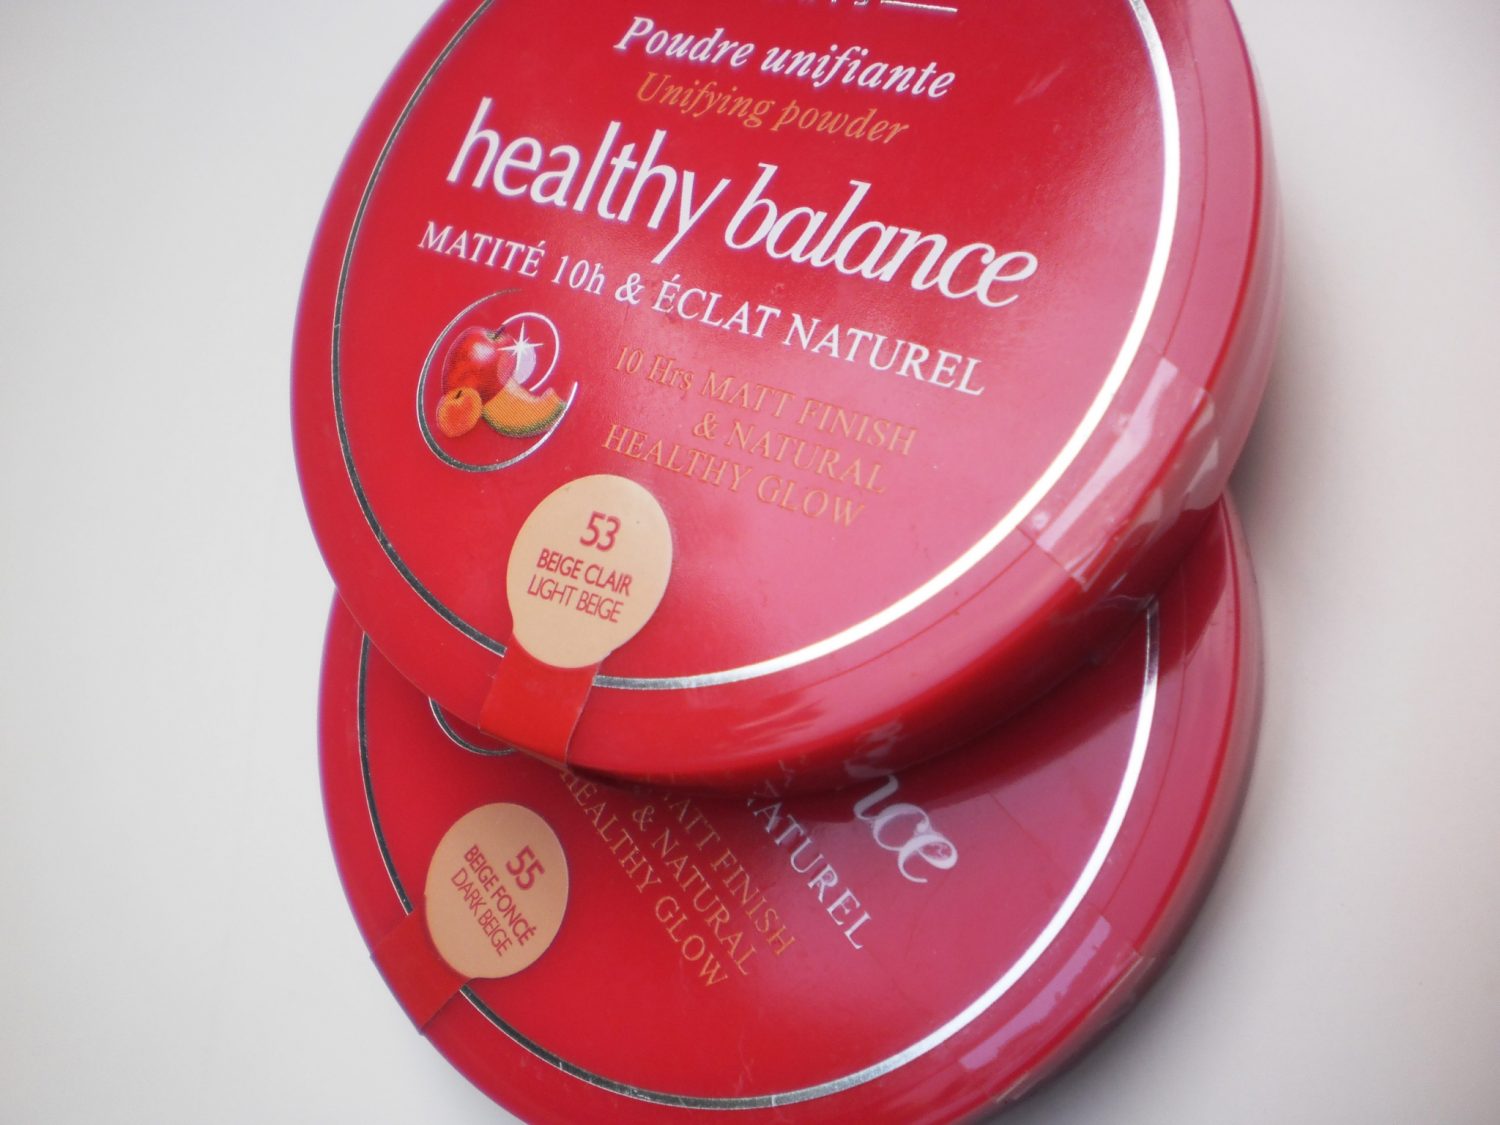 Review: Bourjois Healthy Balance Unifying Powder